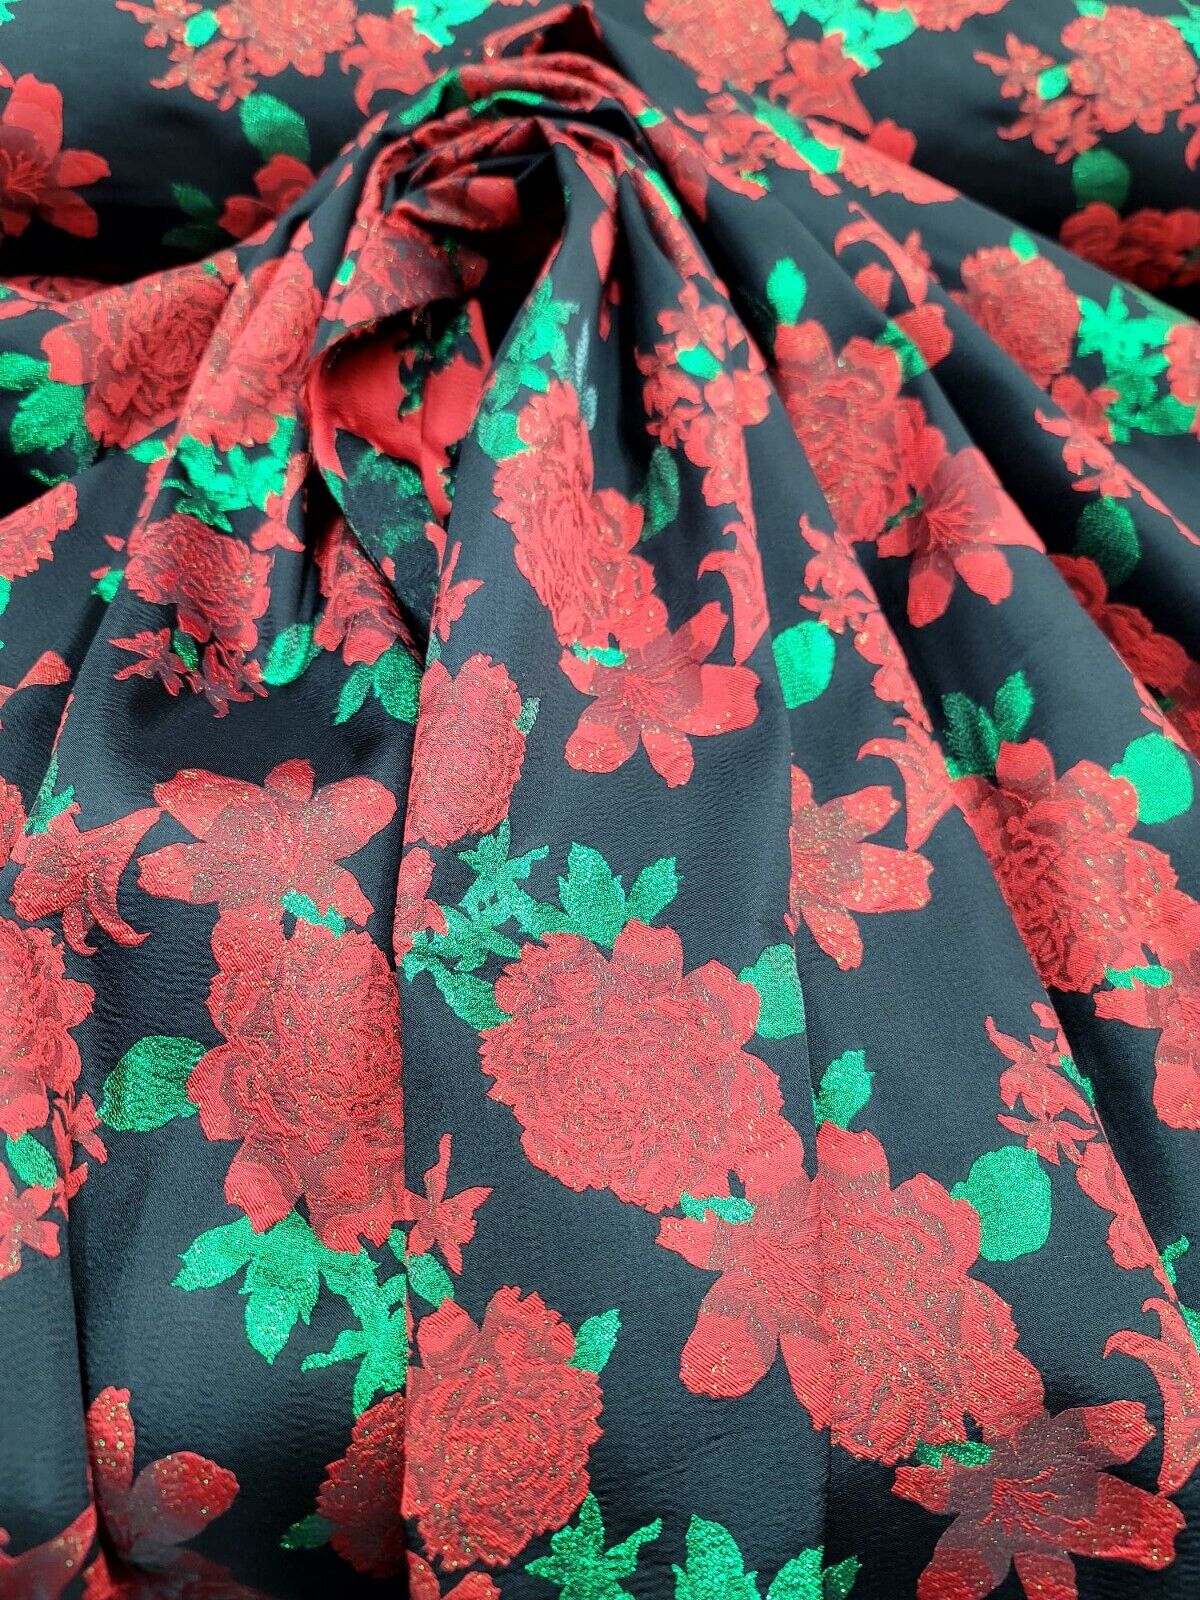 Red Floral Green Leaves Brocade Fabric - Sold By The Yard - Black Background Dress (60” Width)